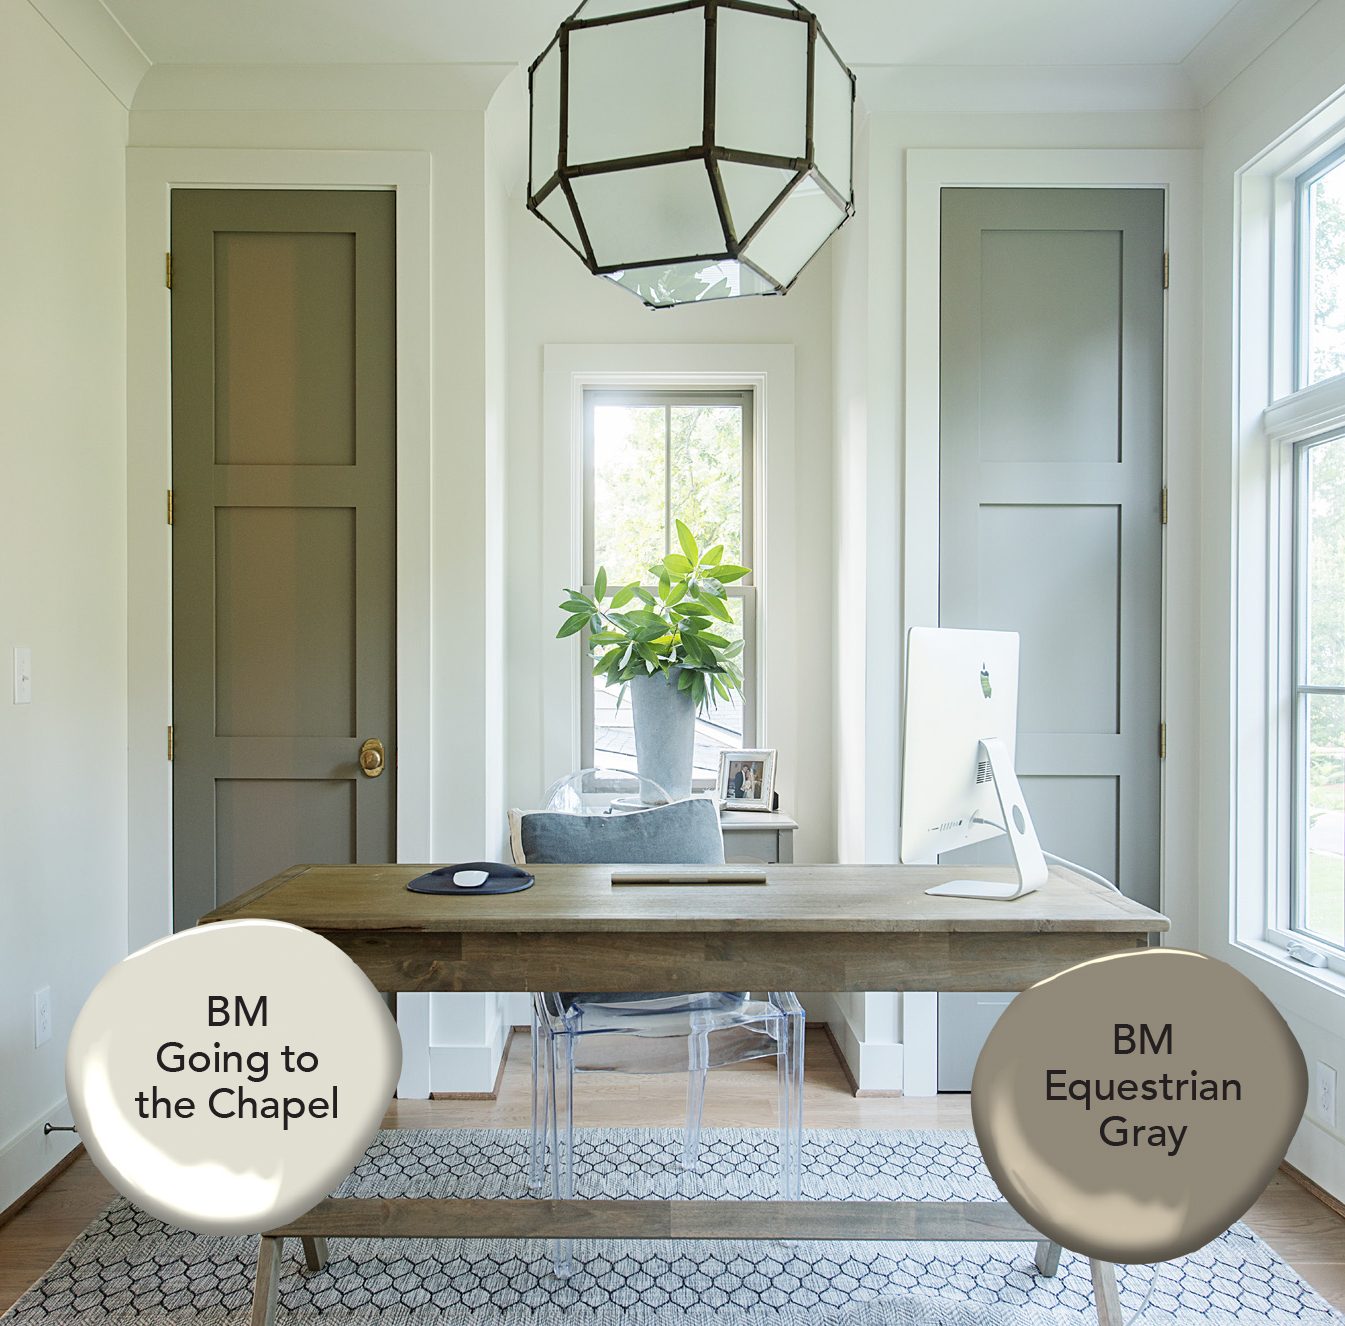 Benjamin Moore Going to the Chapel and Equestrian Gray